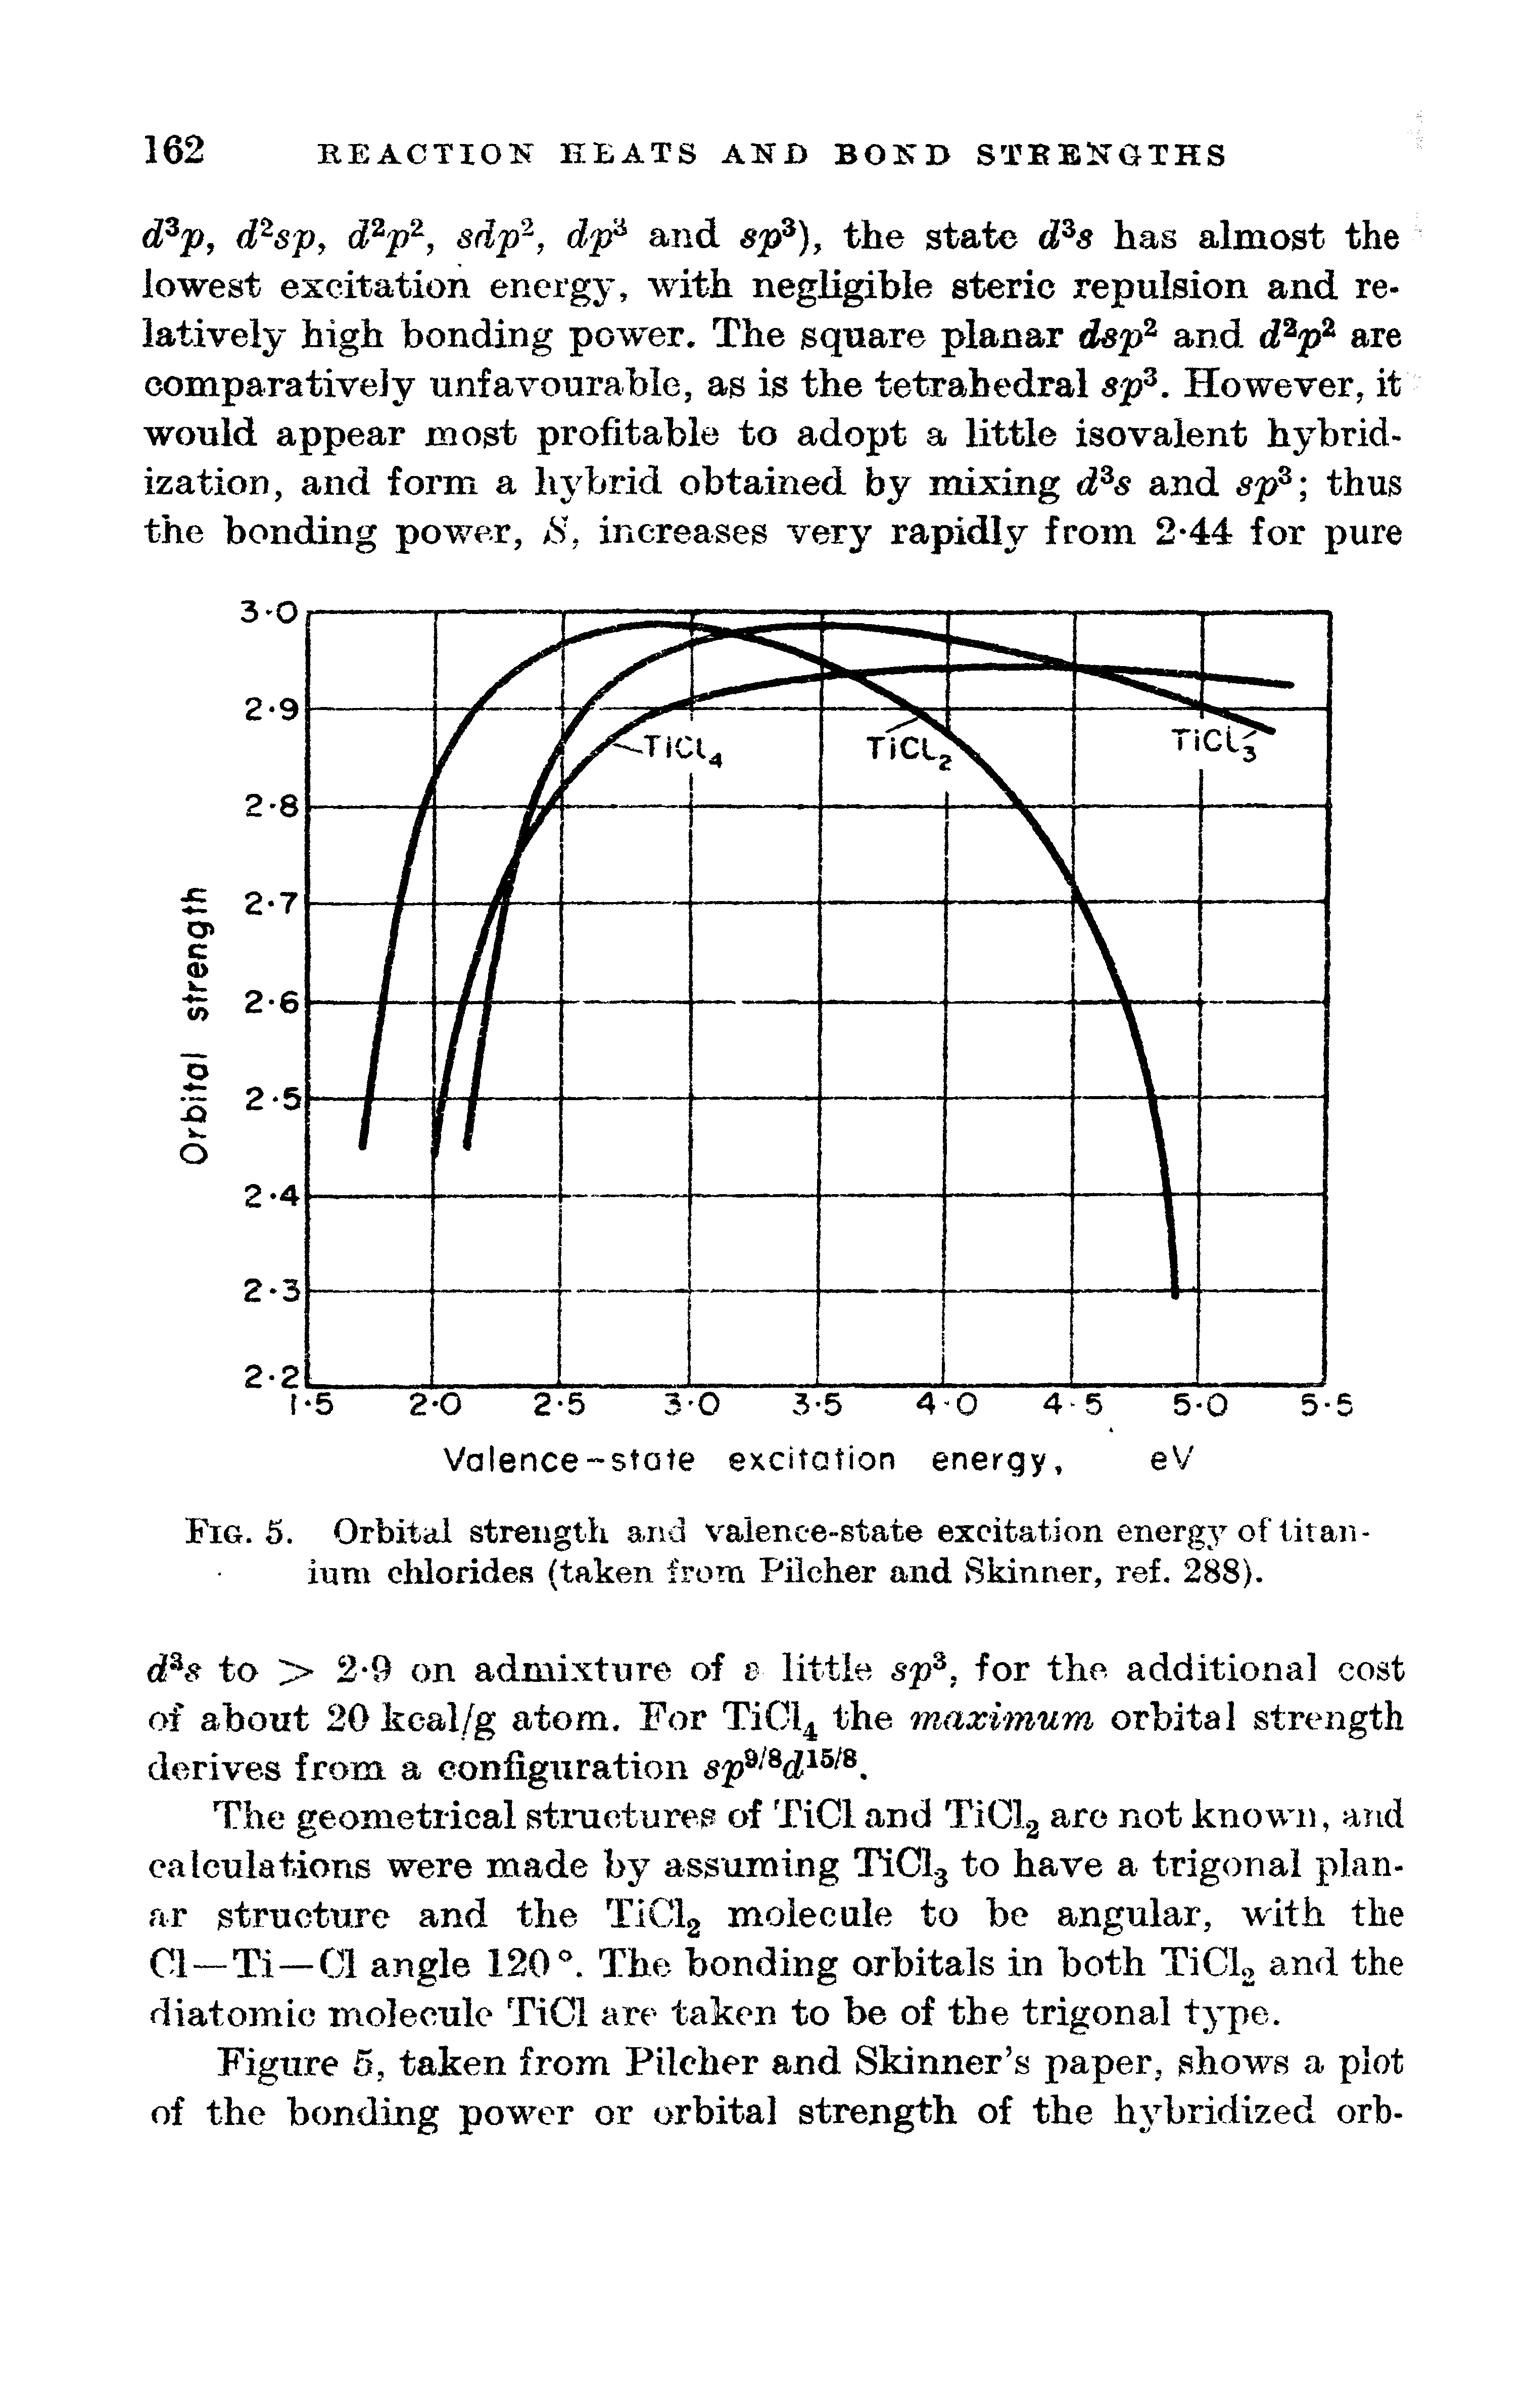 Fig. 5. Orbital strength and valence-state excitation energy of titan-inm clilorides (taken from Pilcher and Skinner, ref. 288).